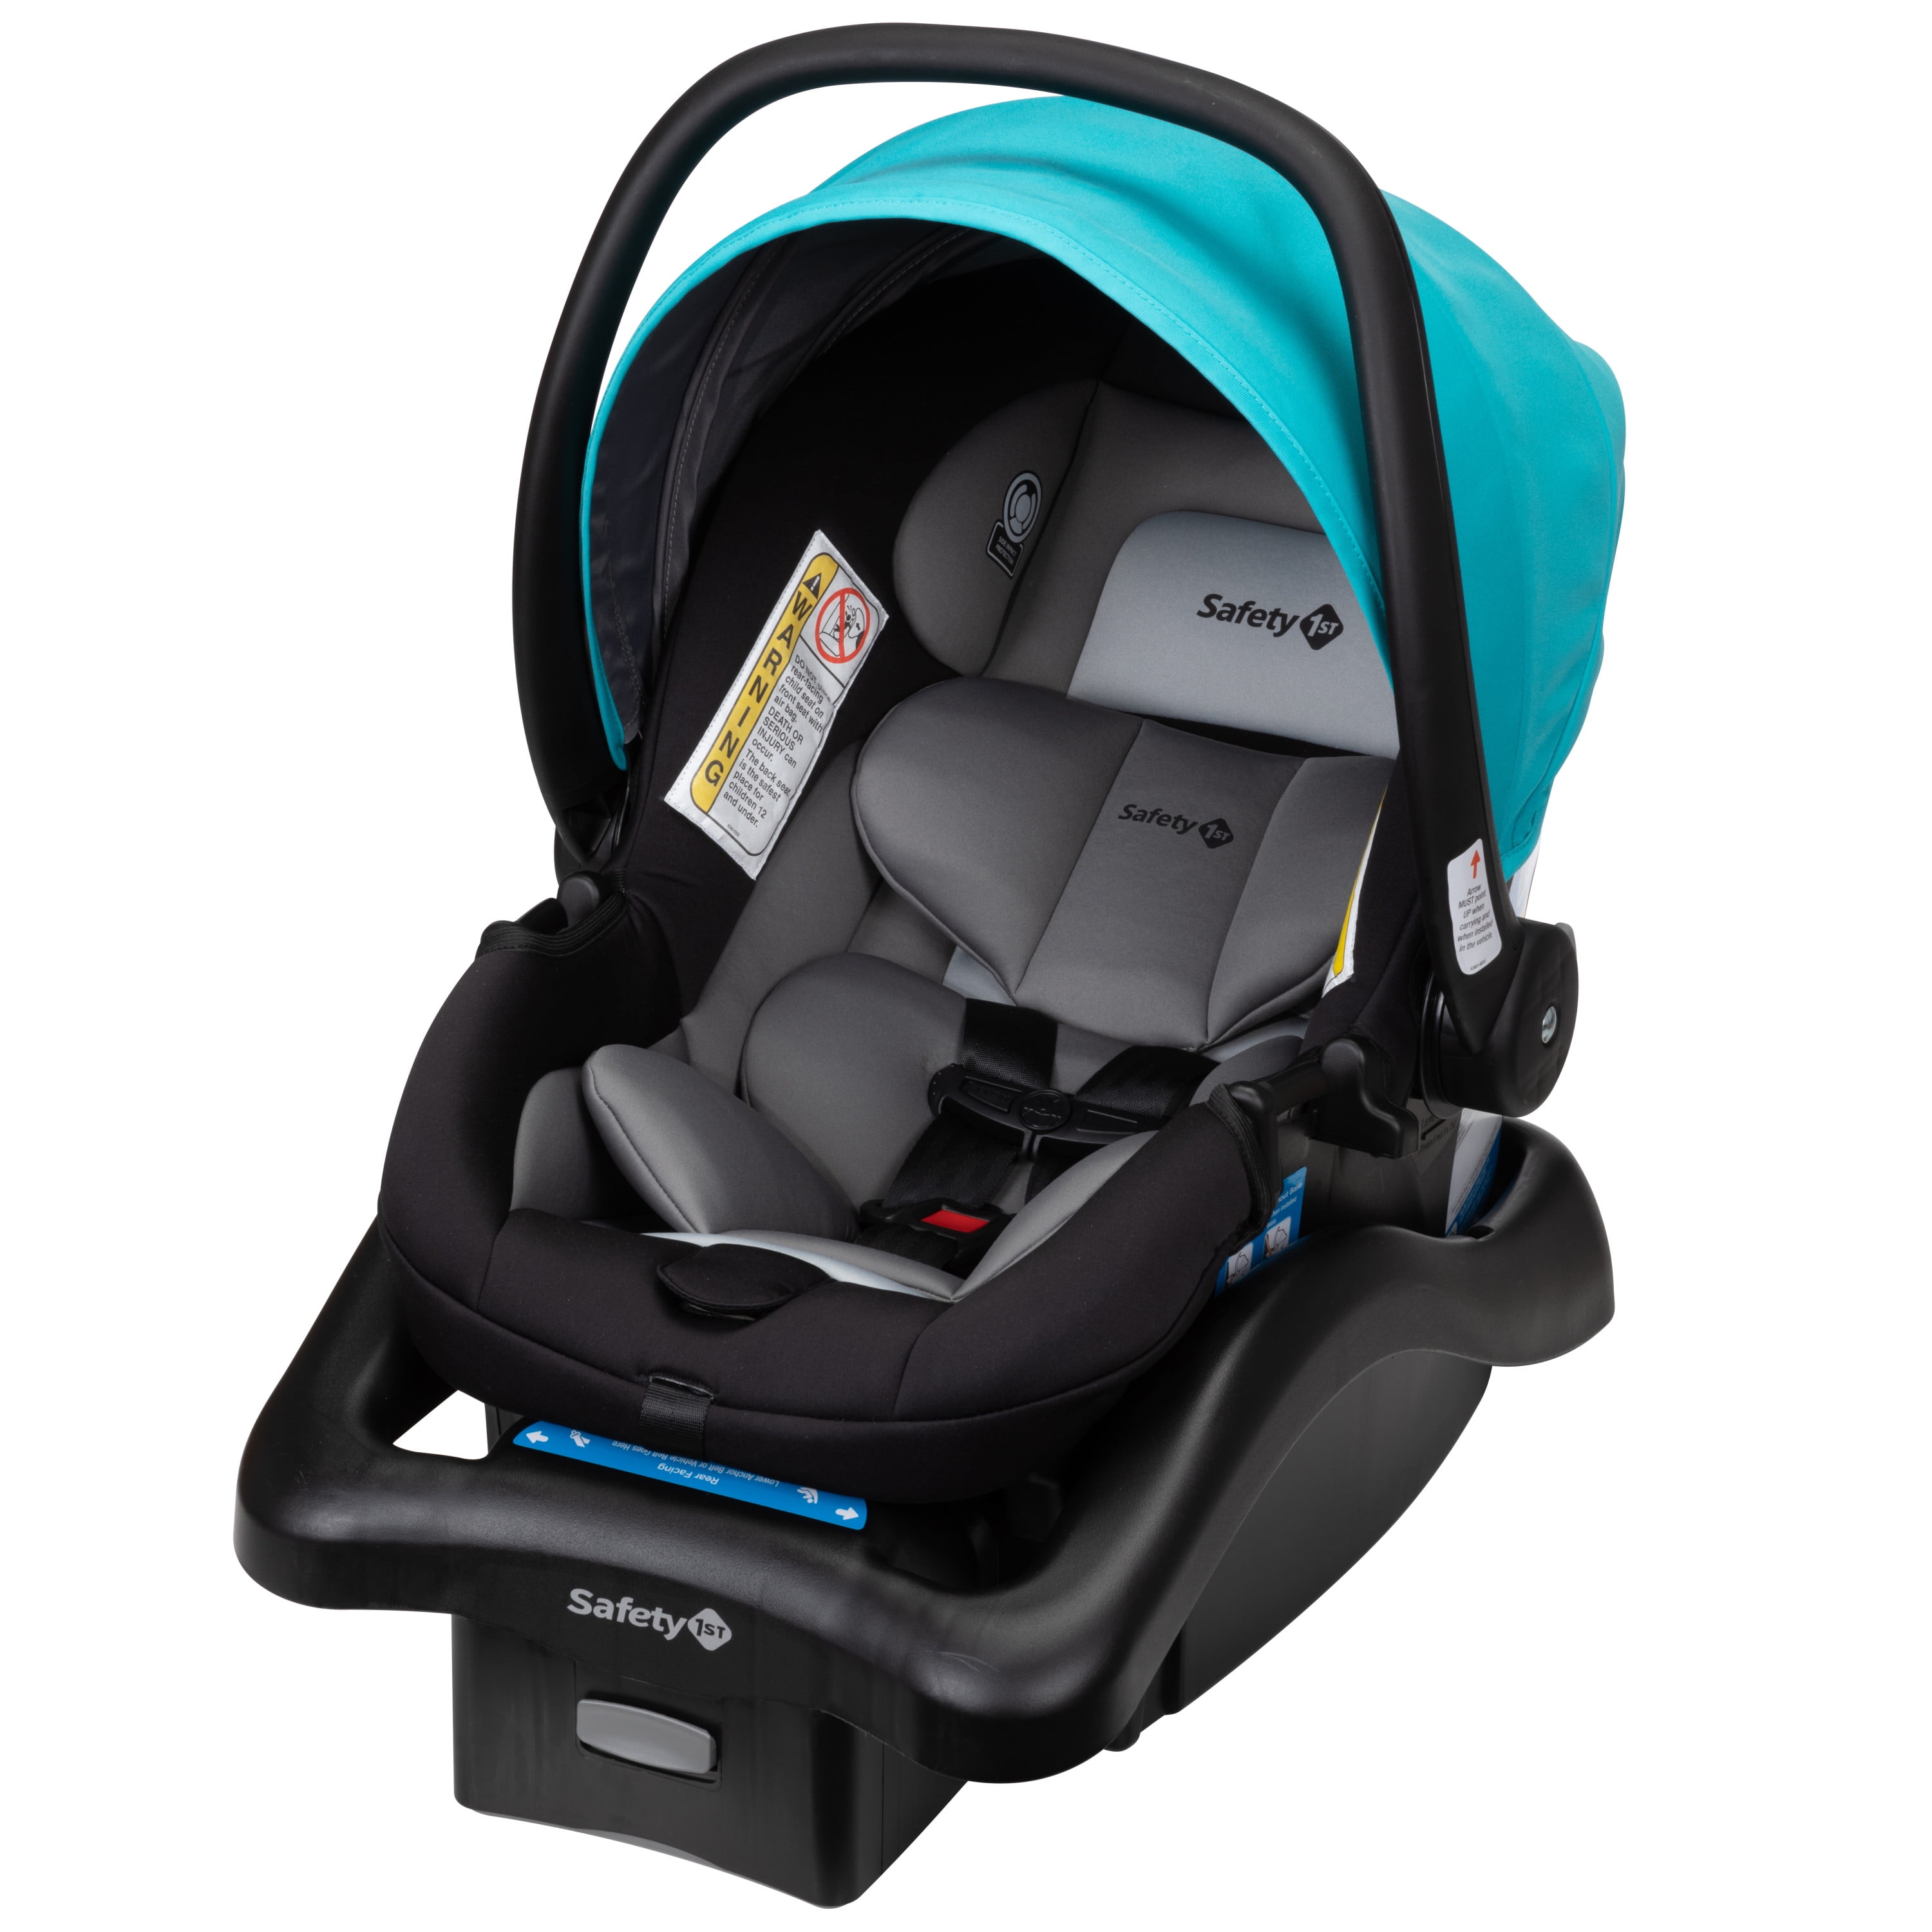 Chicco Keyfit 30 Infant Child Safety Car Seat & Base Nottingham 4-30 lbs NEW 